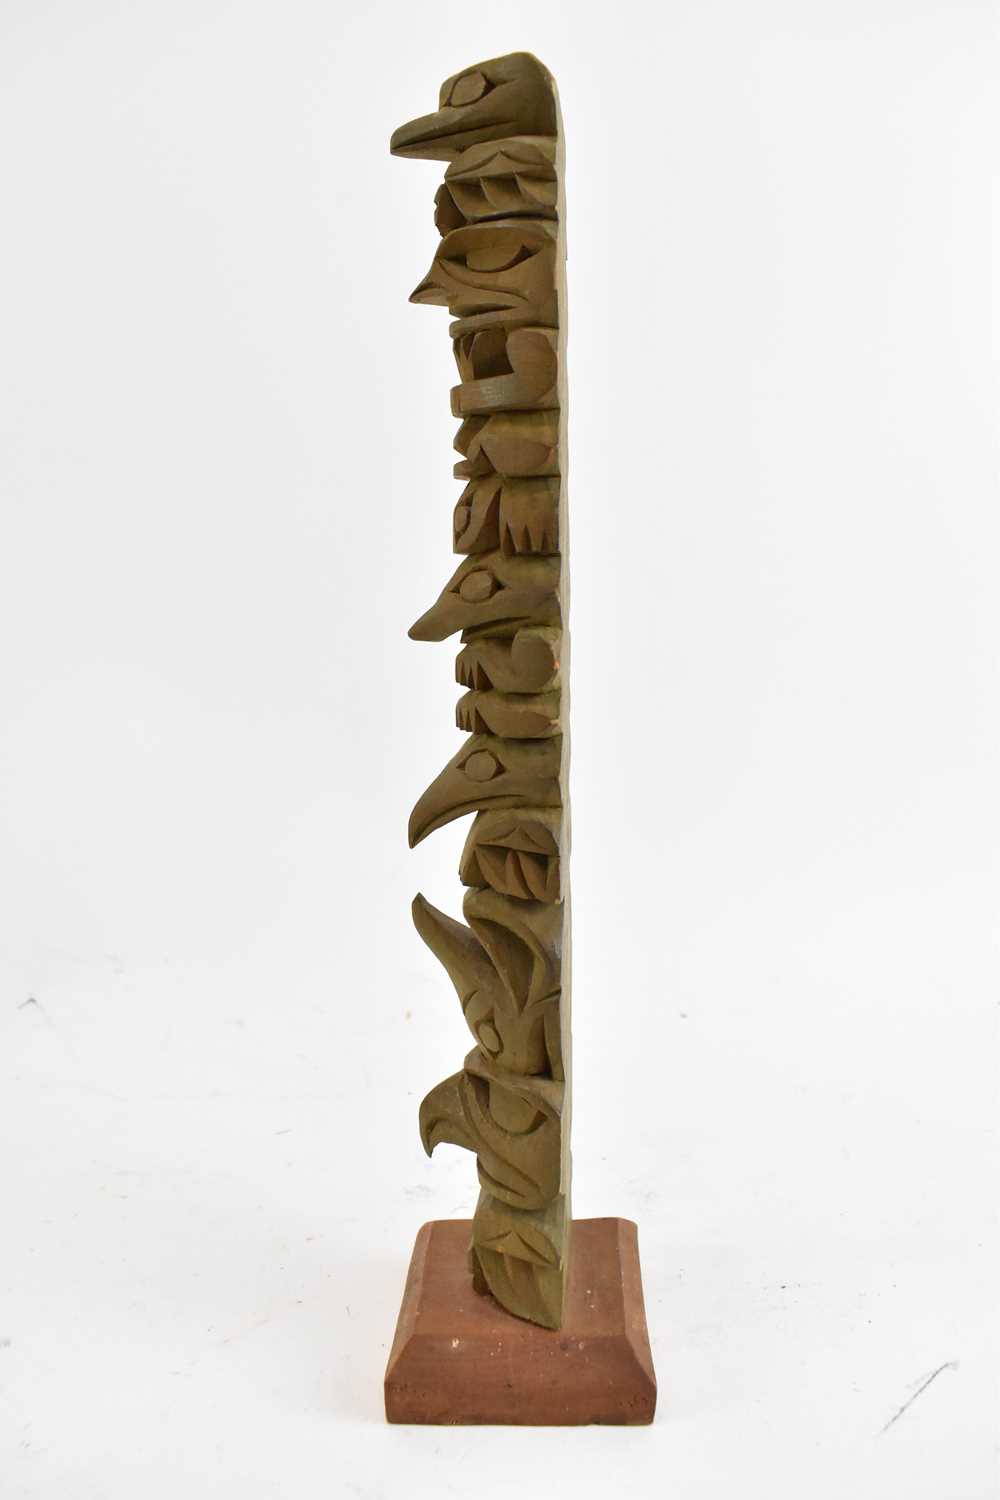 RAYMOND WILLIAMS; a carved wooden totem pole, signed to the base, height 31.5cm. - Image 3 of 3